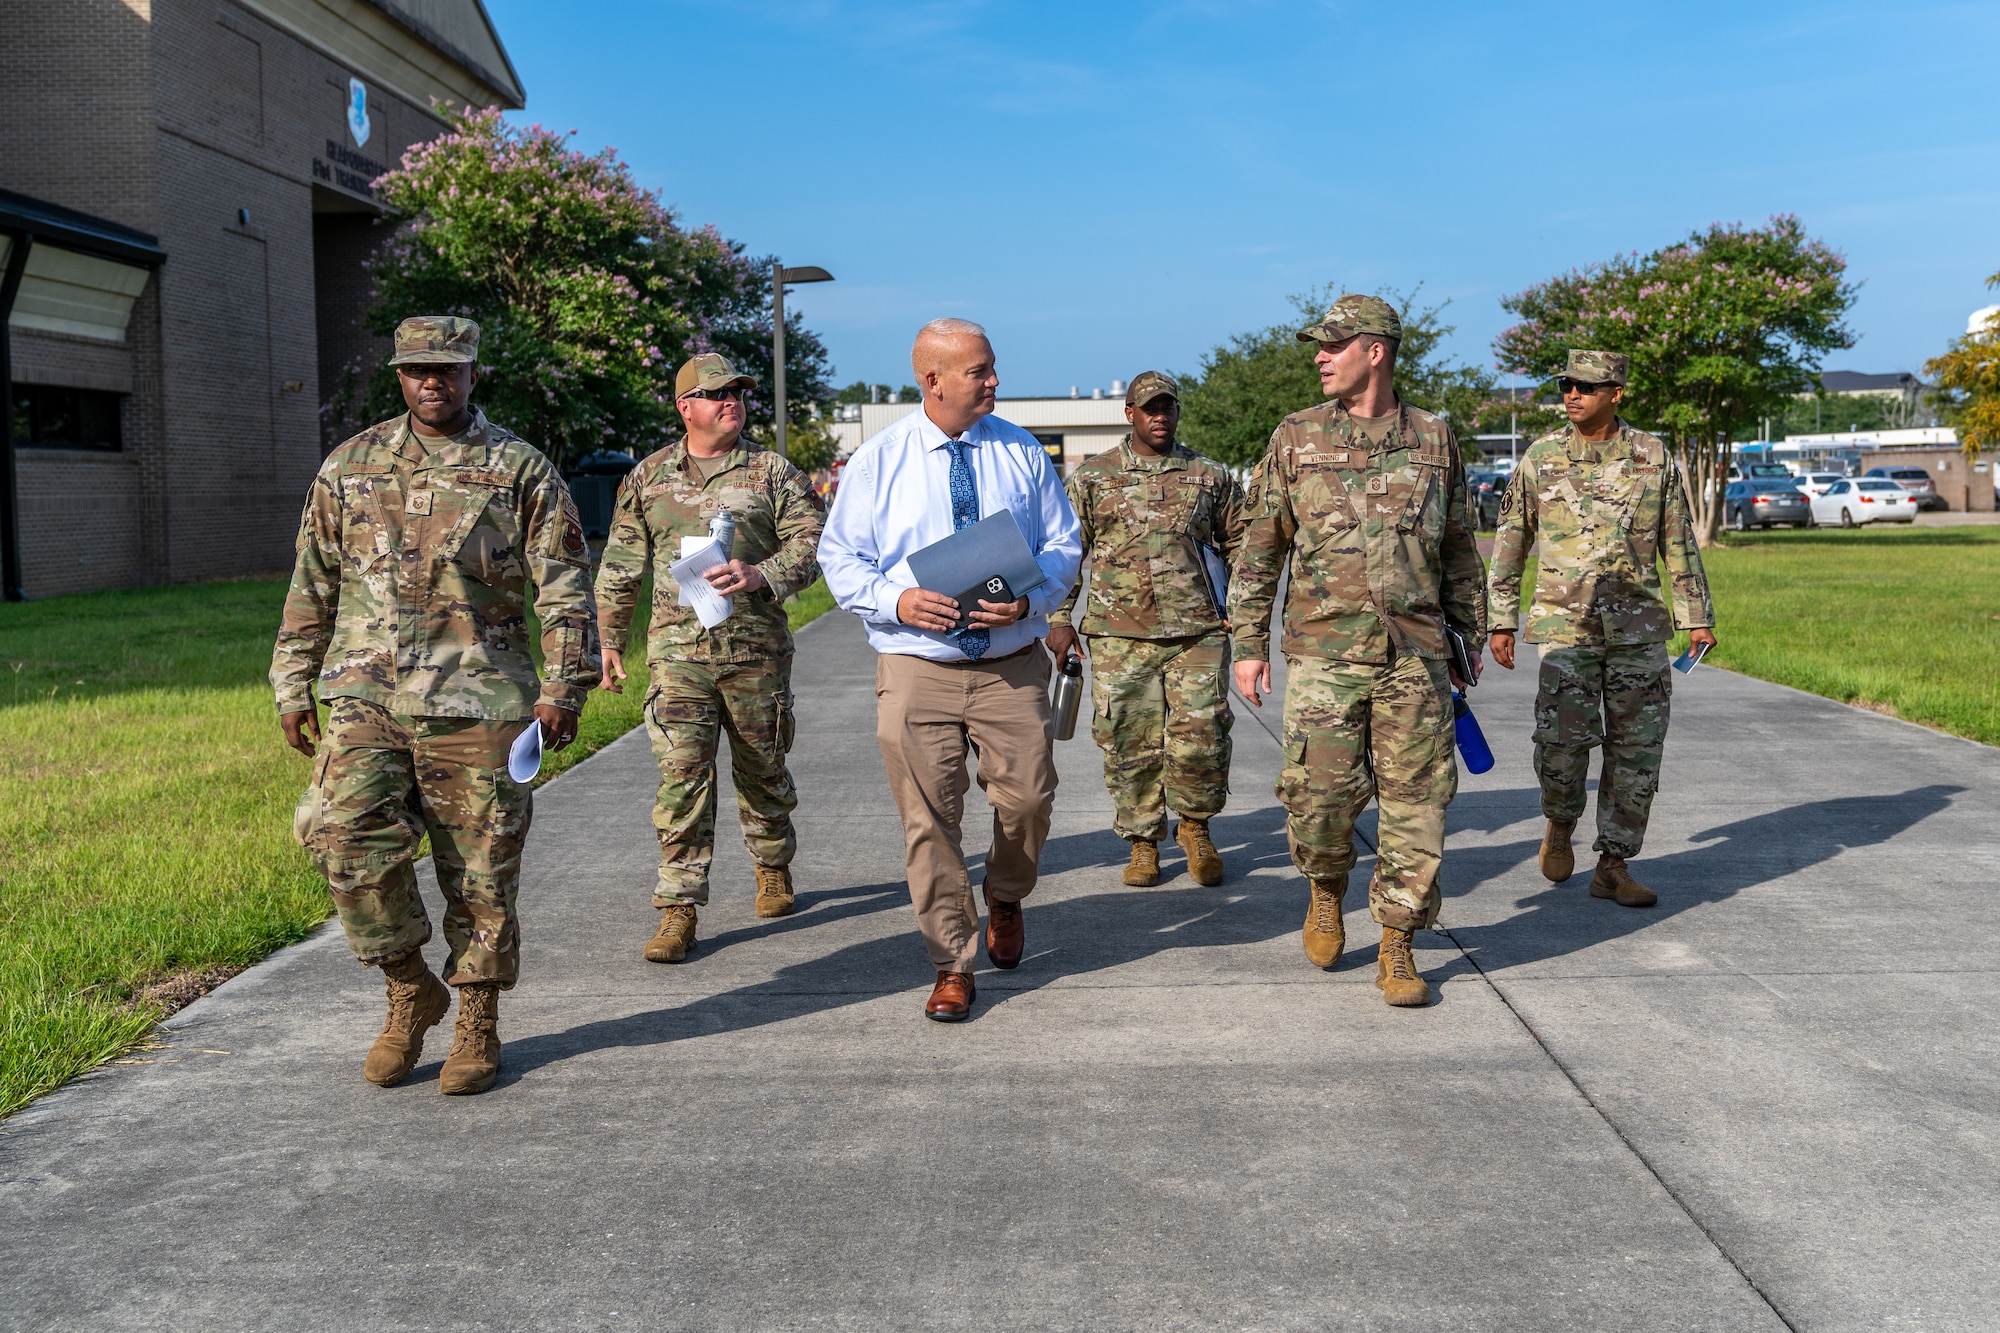 U.S. Air Force Chief Master Sgt. Michael Venning, 81st Training Wing command chief, and Mr. Craig Biddington, 81st TRW director of staff, walk to their next location during an immersion tour with the 81st Training Group at Keesler Air Force Base, Mississippi, Aug. 1, 2023.